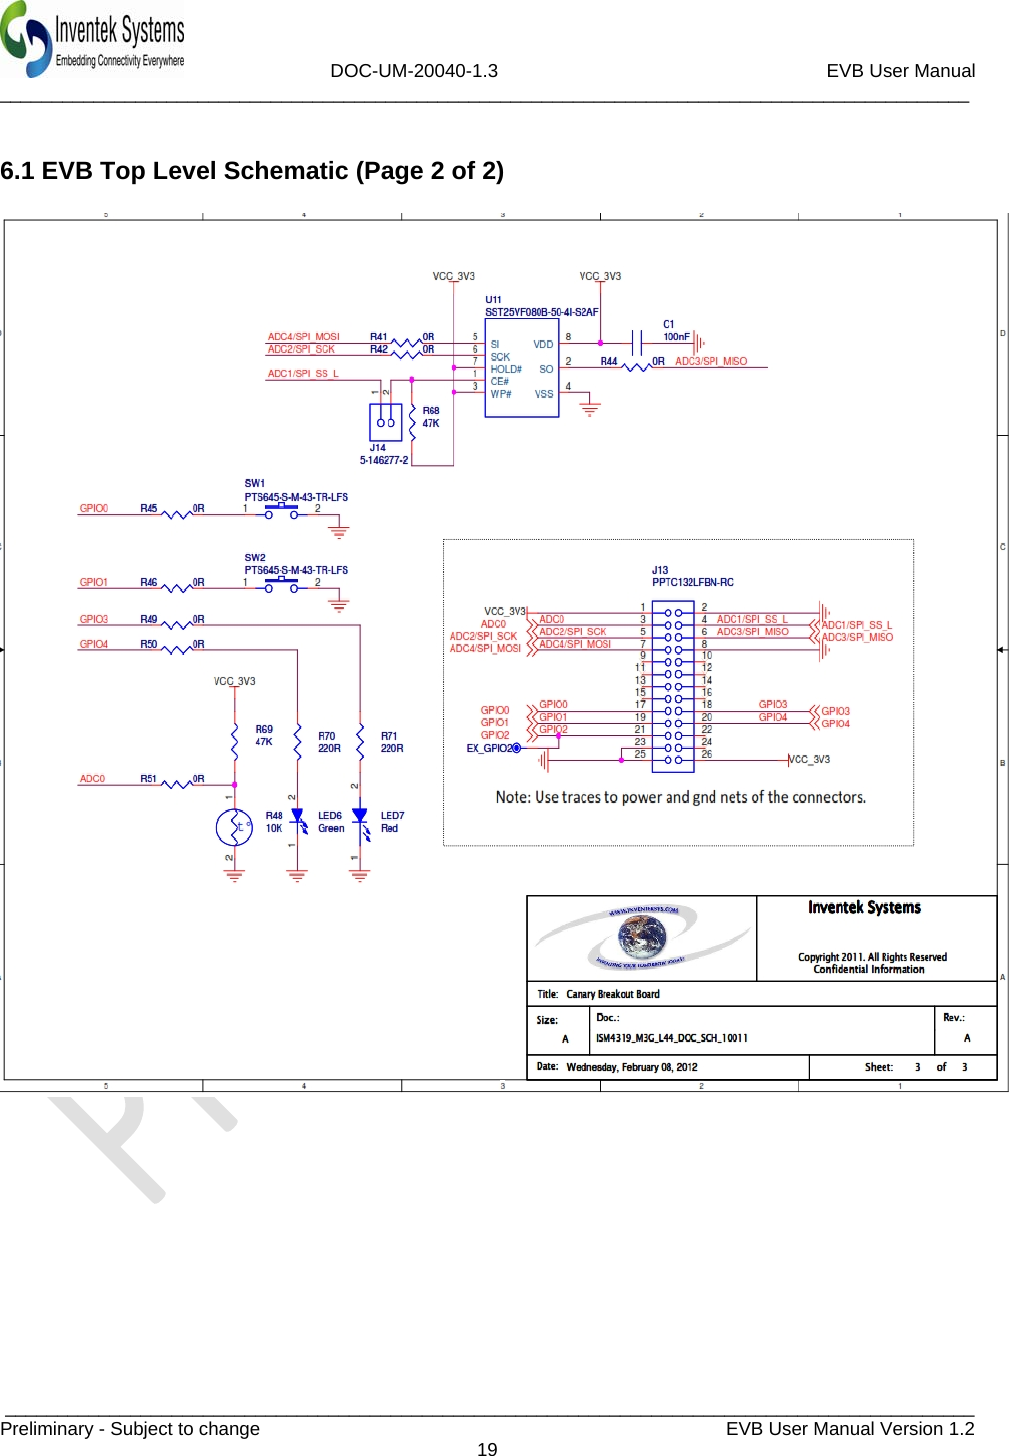                             DOC-UM-20040-1.3                                                         EVB User Manual  _____________________________________________________________________________________________  _____________________________________________________________________________________________Preliminary - Subject to change   EVB User Manual Version 1.2  19   6.1 EVB Top Level Schematic (Page 2 of 2)     